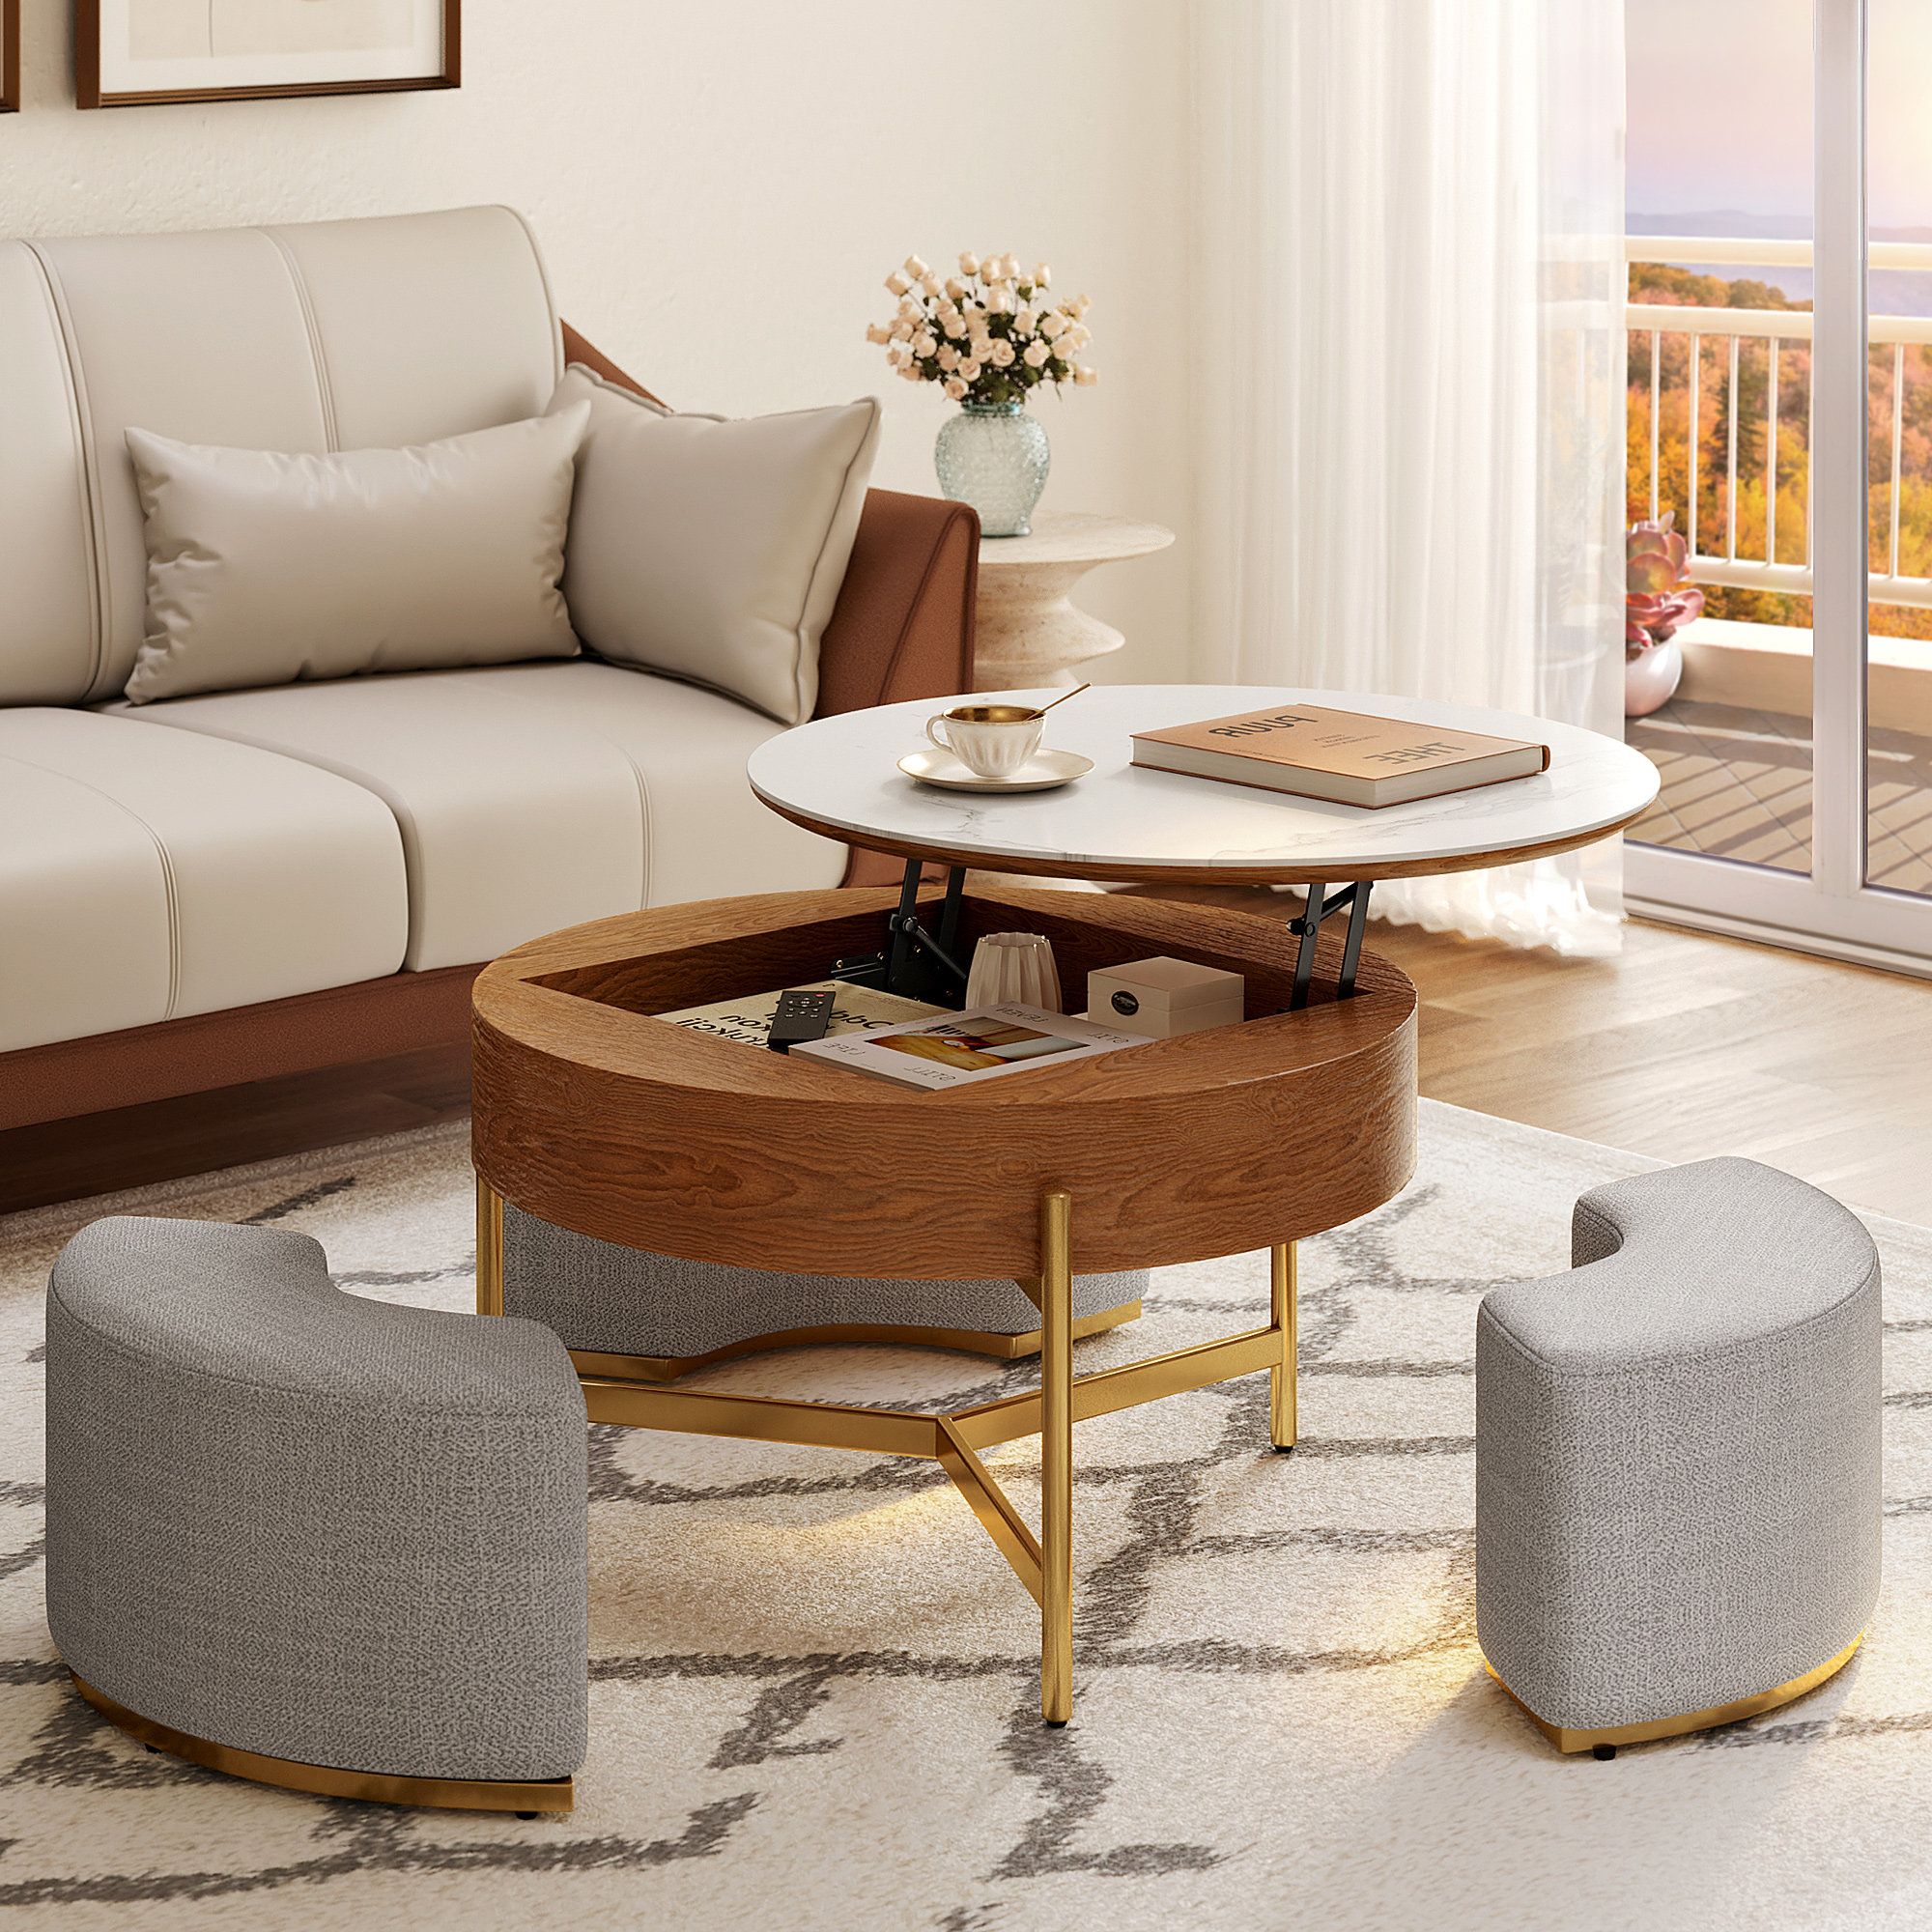 Lift Top Coffee Tables Inside Most Up To Date Everly Quinn Sohad Lift Top Extendable Frame Coffee Table With Storage &  Reviews (View 5 of 10)